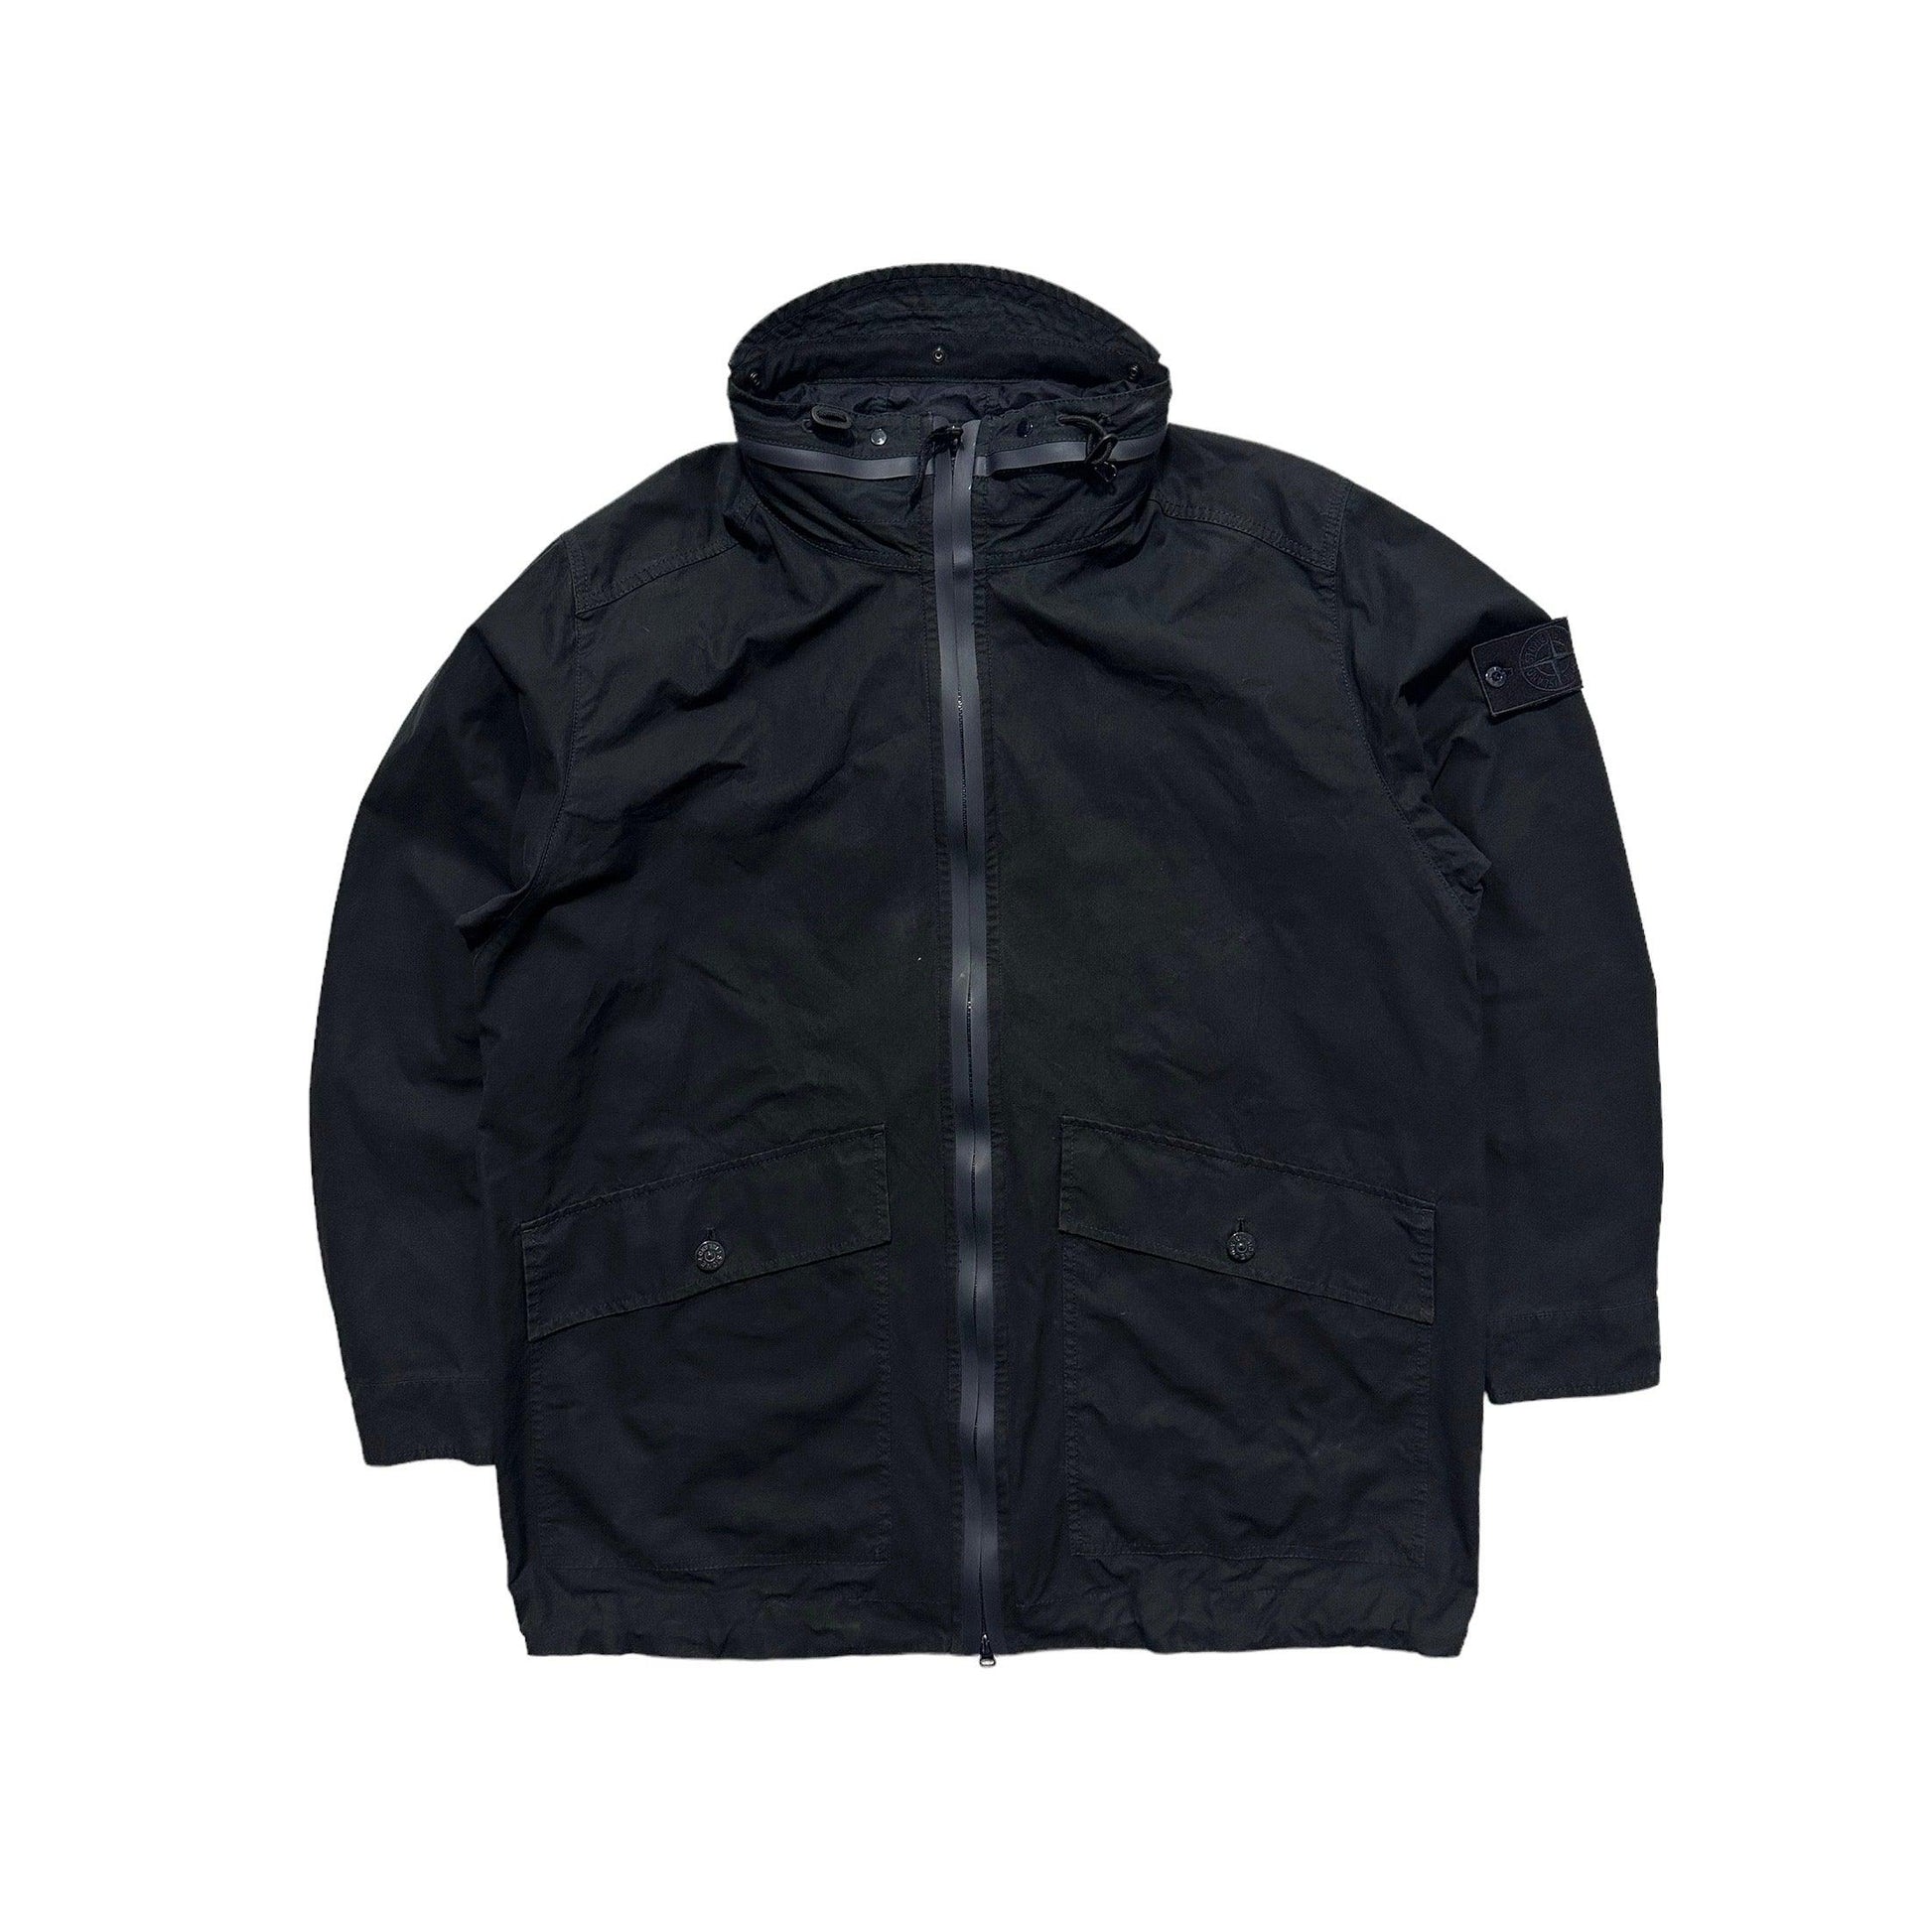 Stone Island Weatherproof Cotton Ghost Piece Parka Jacket with Packable Hood - Known Source